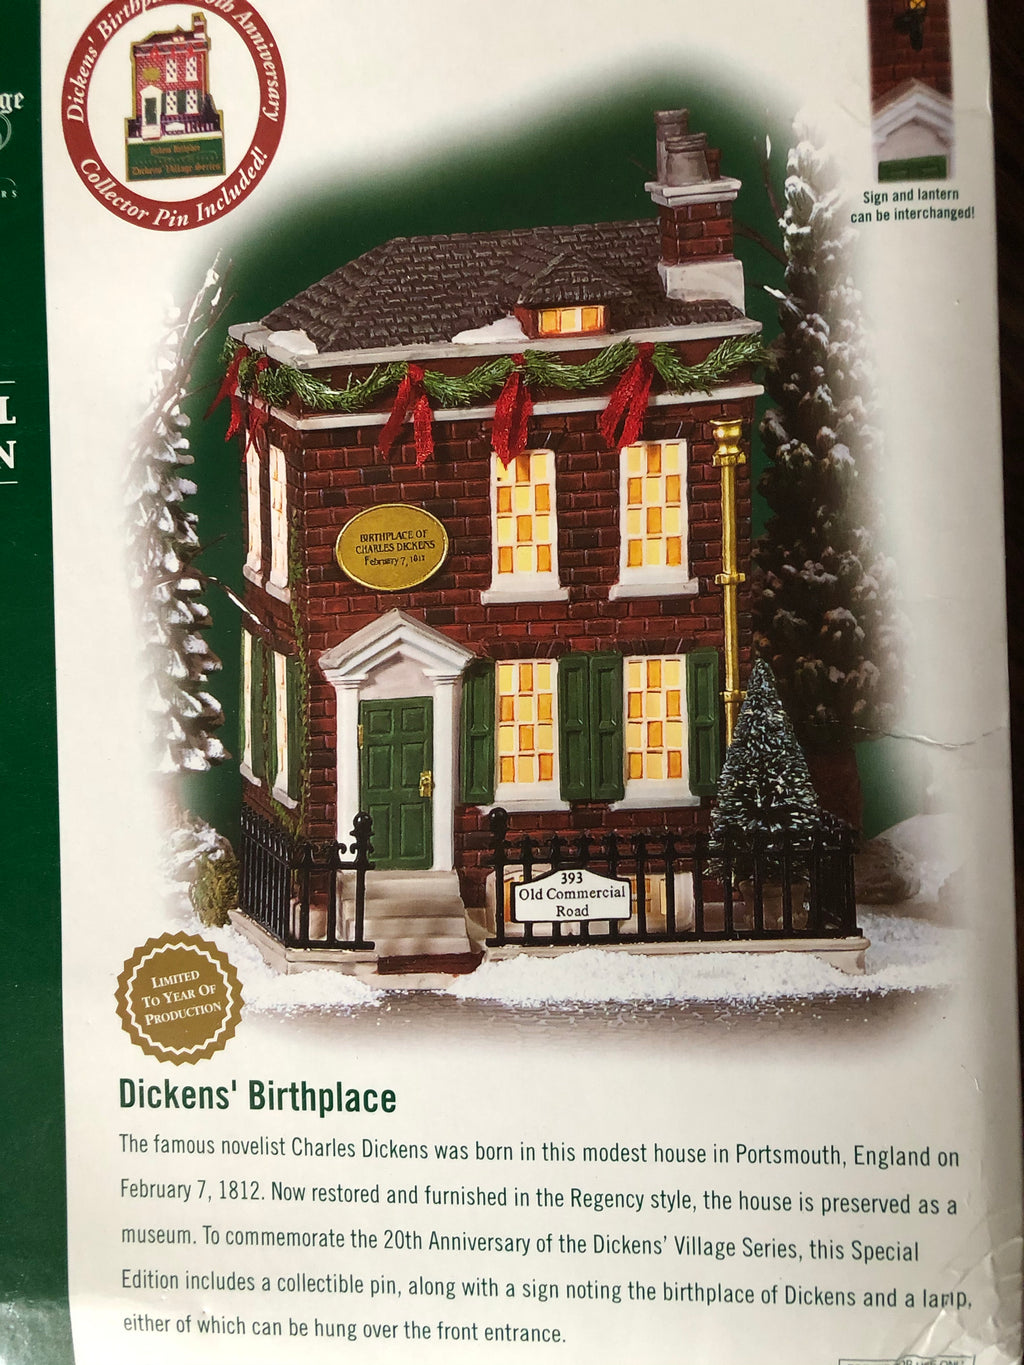 Department 56 Heritage Village Collection ; Christmas in The City Series ; The Capitol